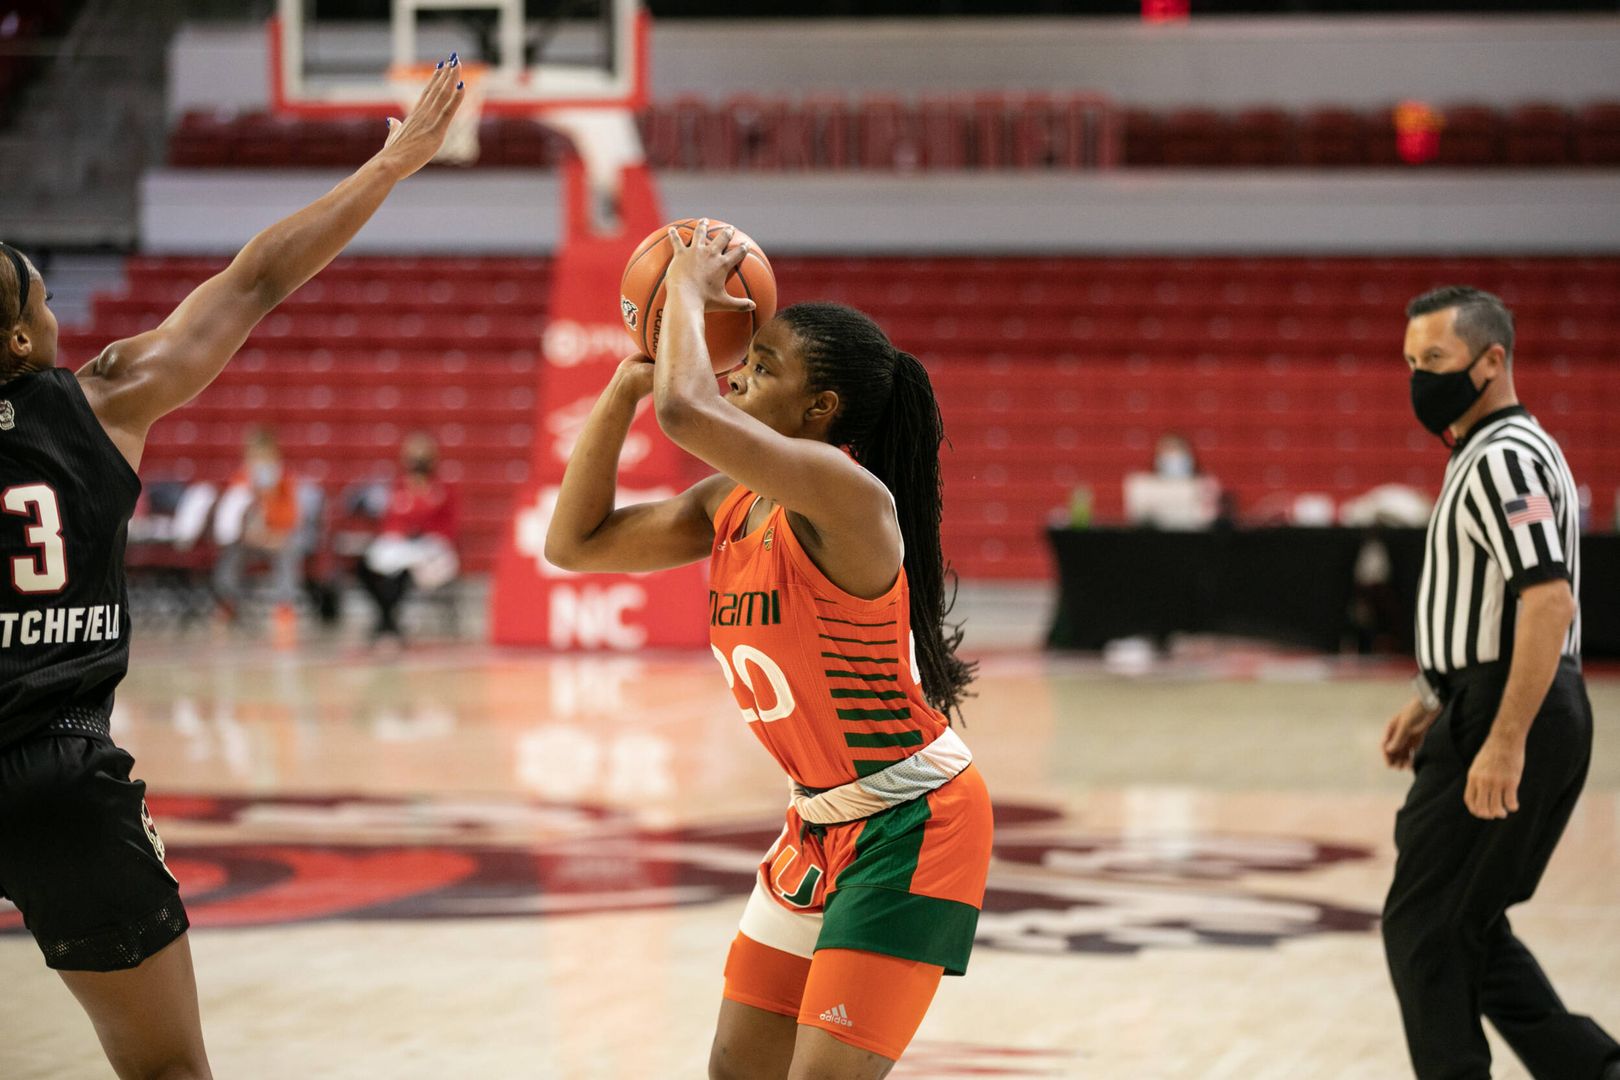 Canes Fall to Wolfpack on the Road